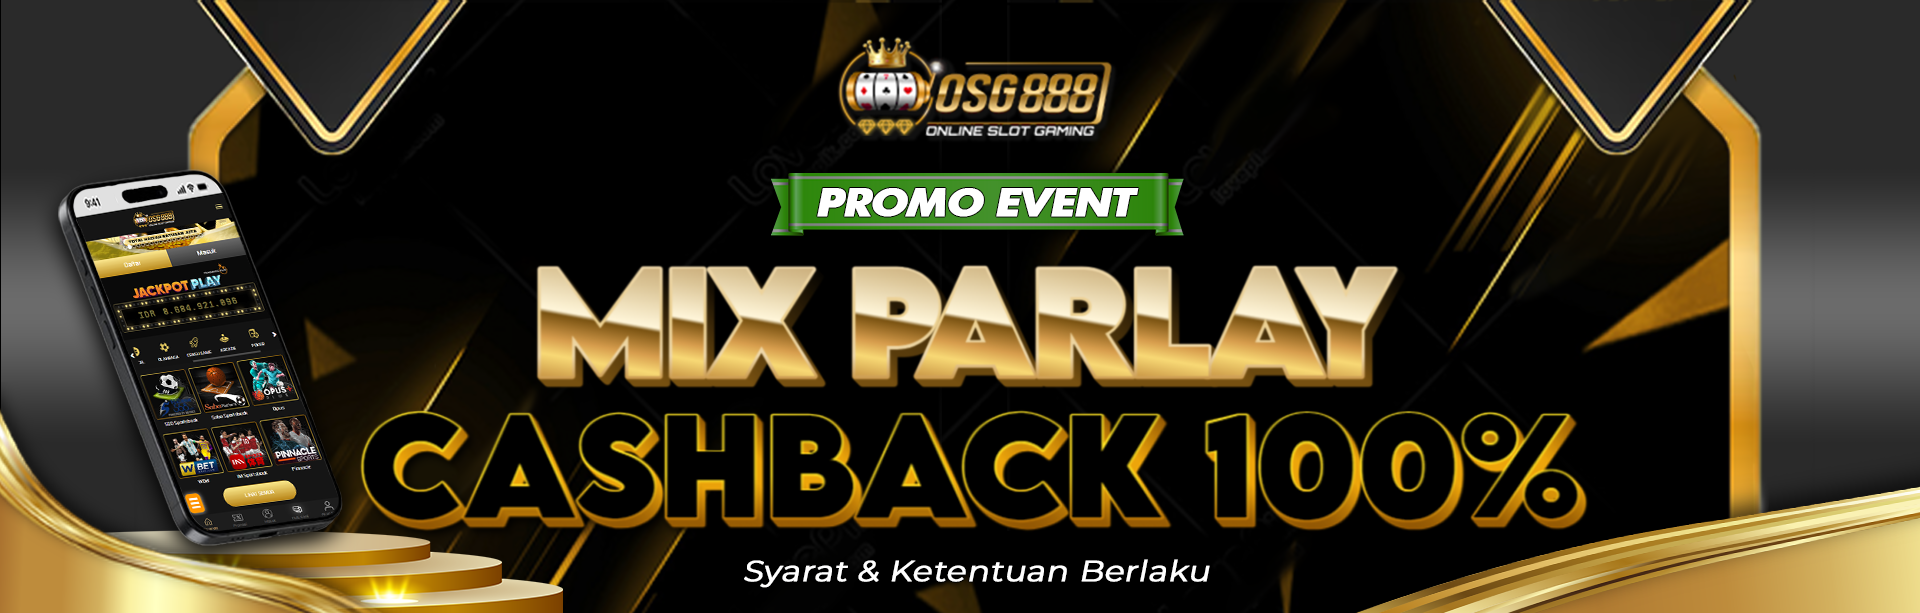 EVENT MIX PARLAY CHASBACK 100%